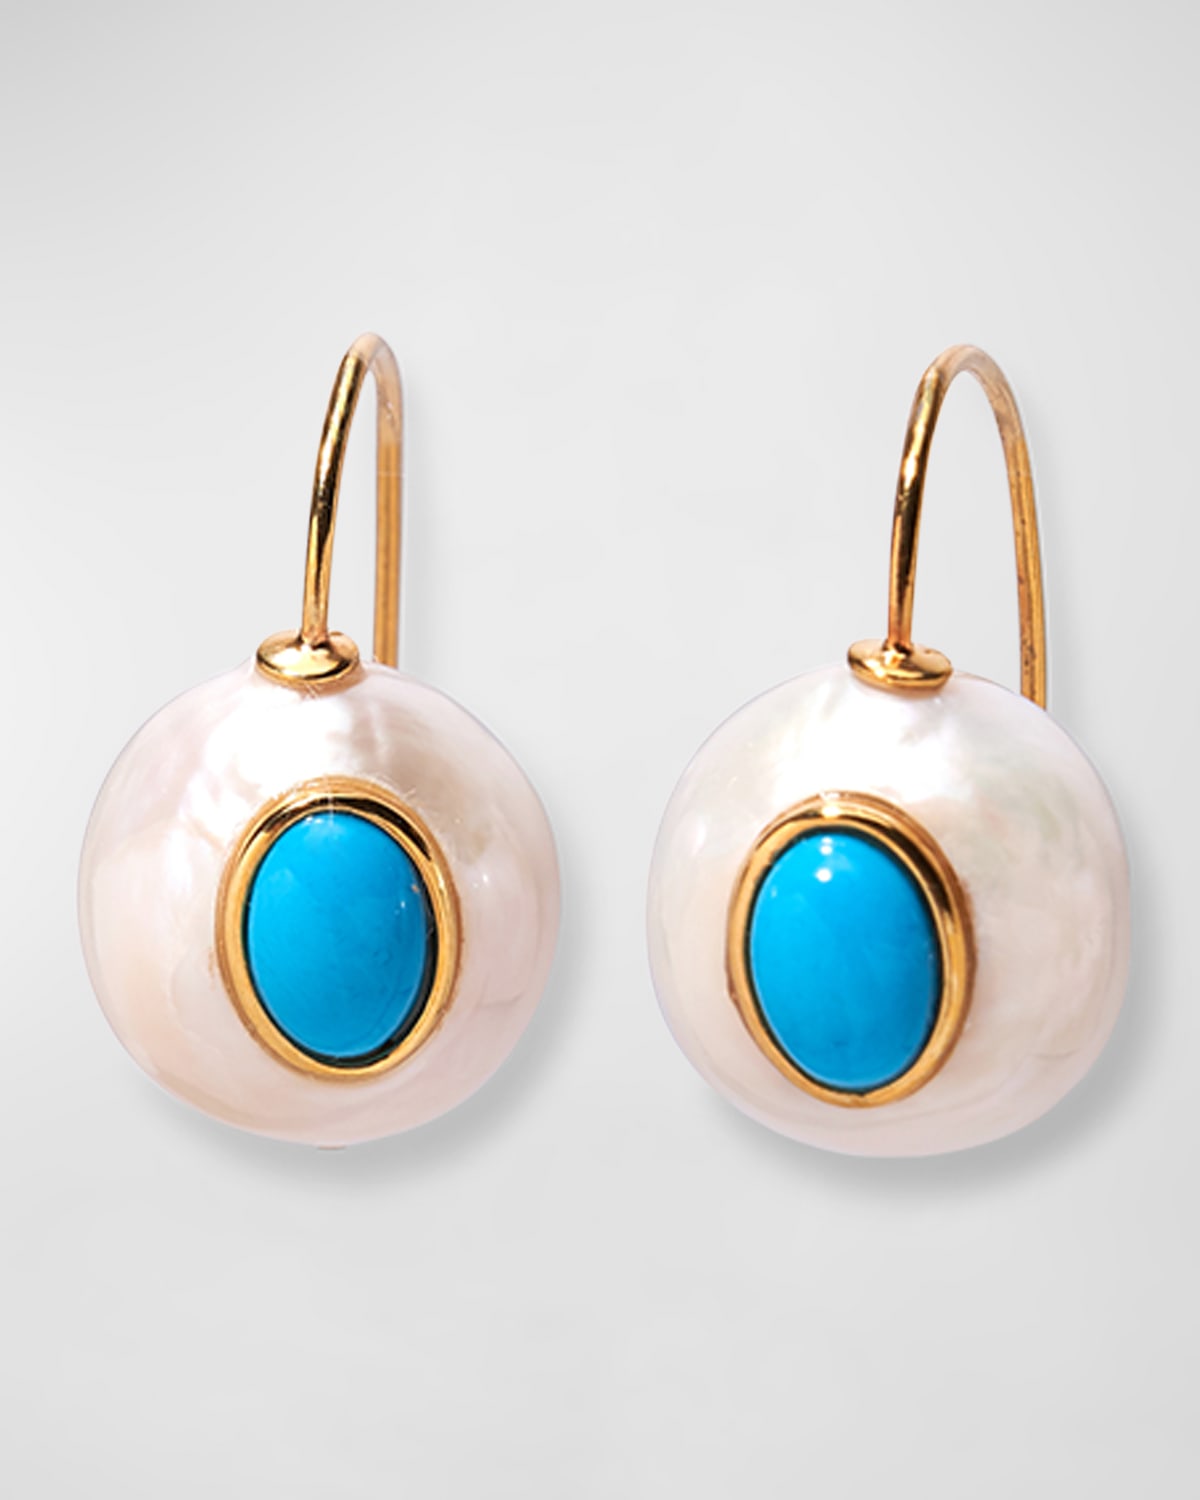 Pablo 24K Gold Plated Pearl and Turquoise Drop Earrings